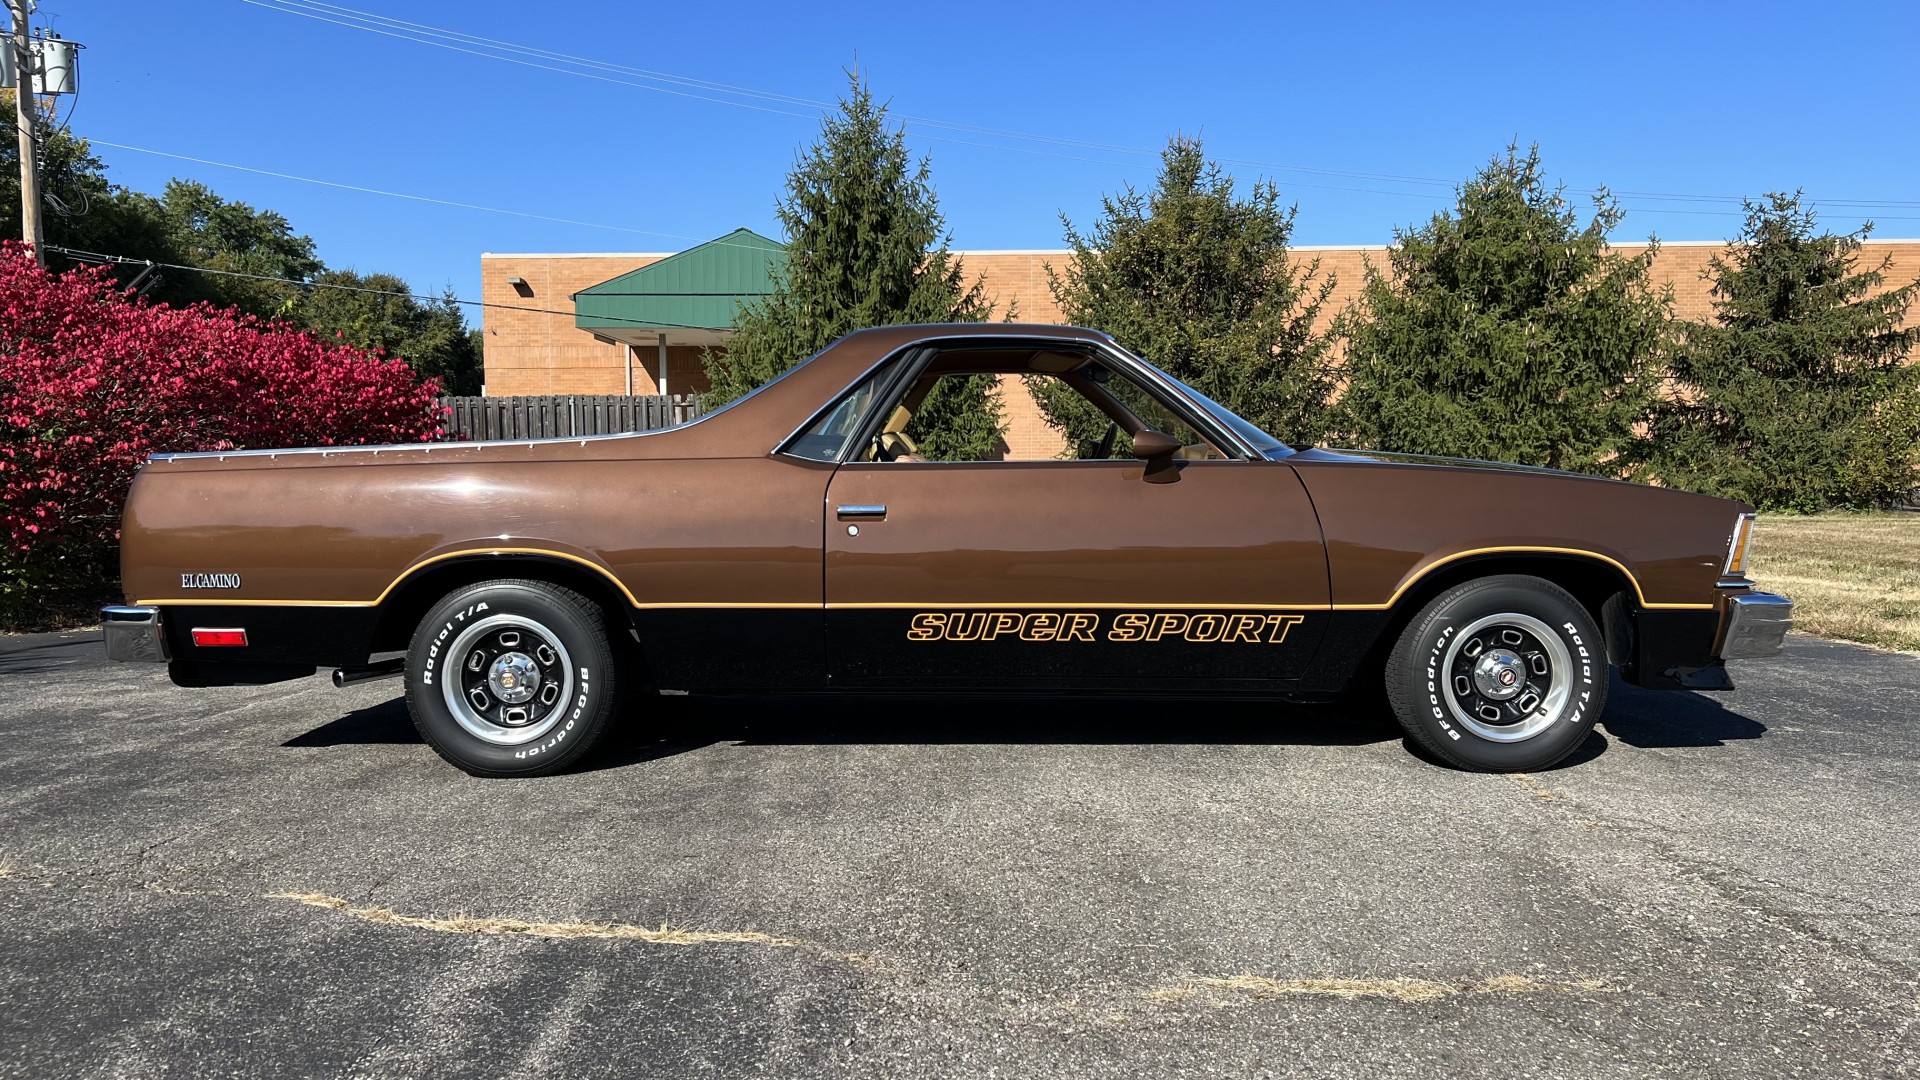 1979 Chevy El Camino SS, 4 Speed, 383 Engine, SOLD!